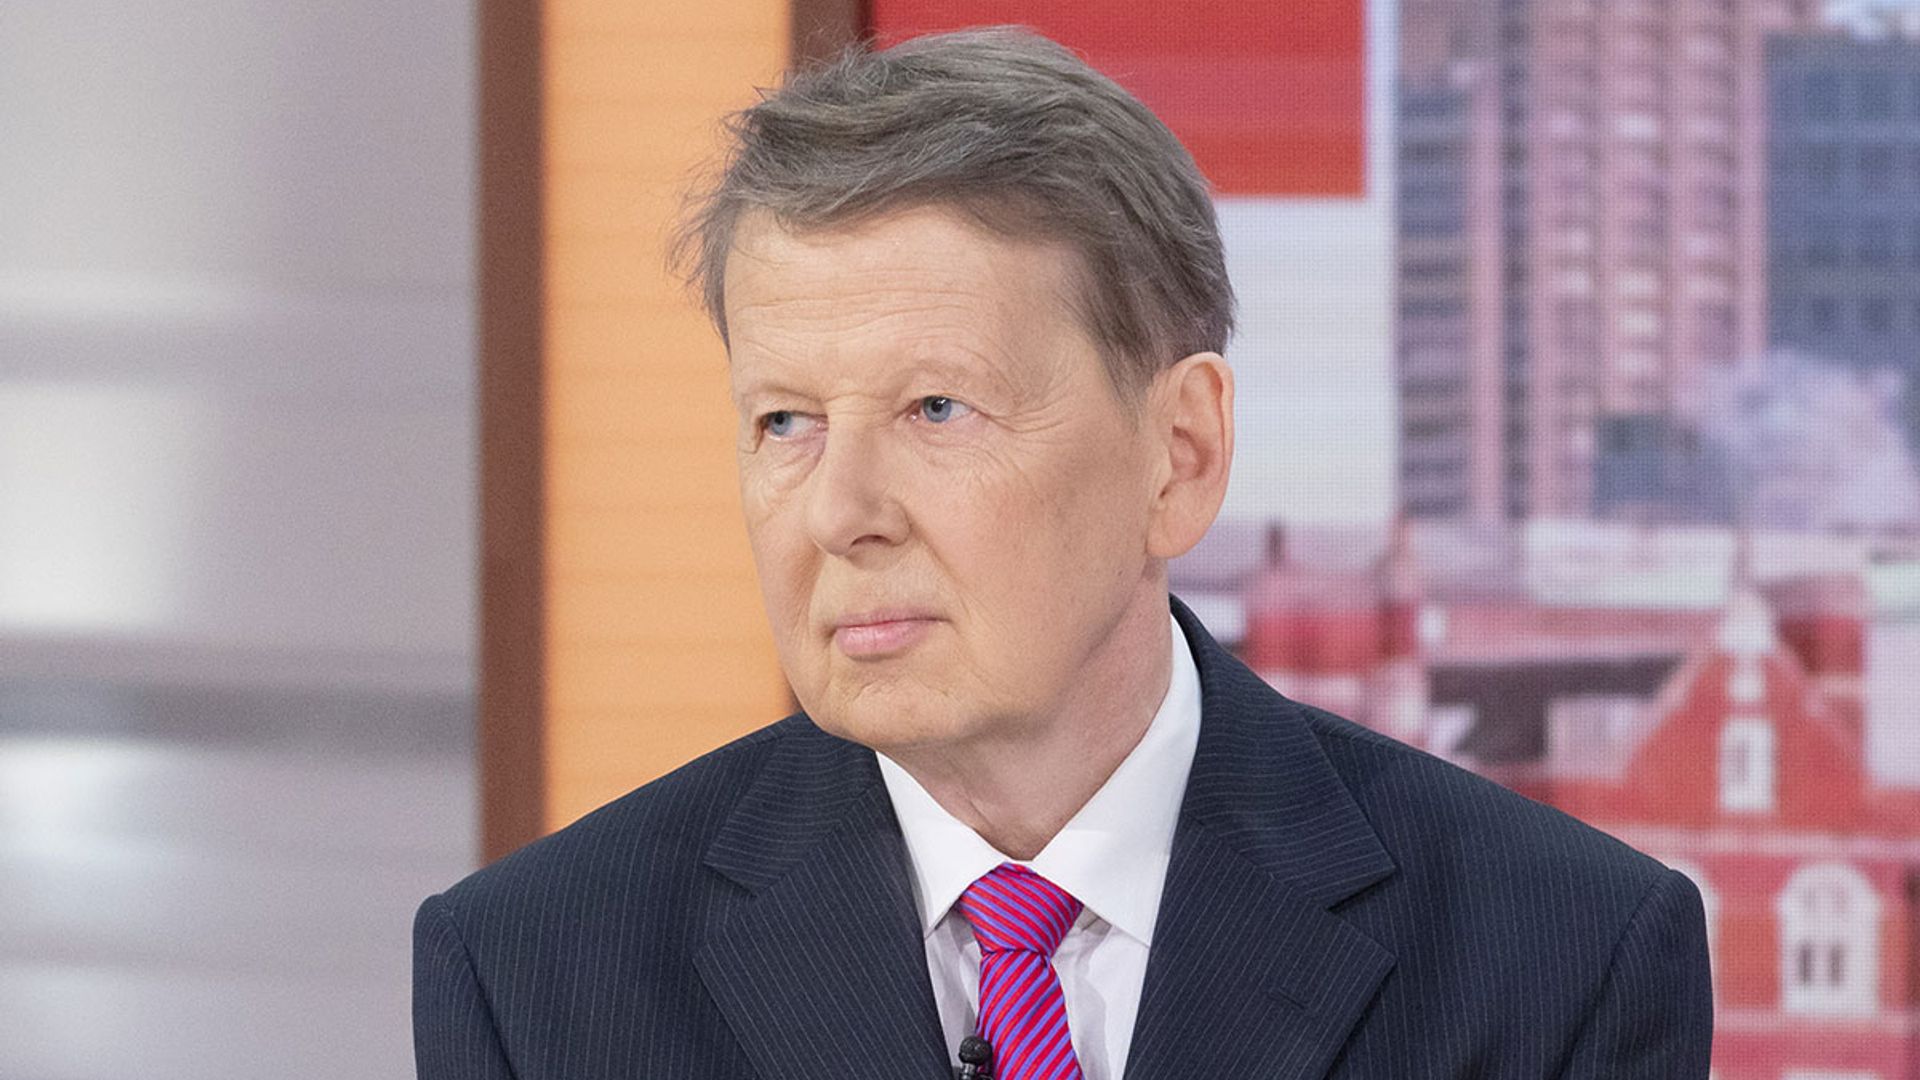 Bill Turnbull takes break from job for 'health reasons' as he fights cancer